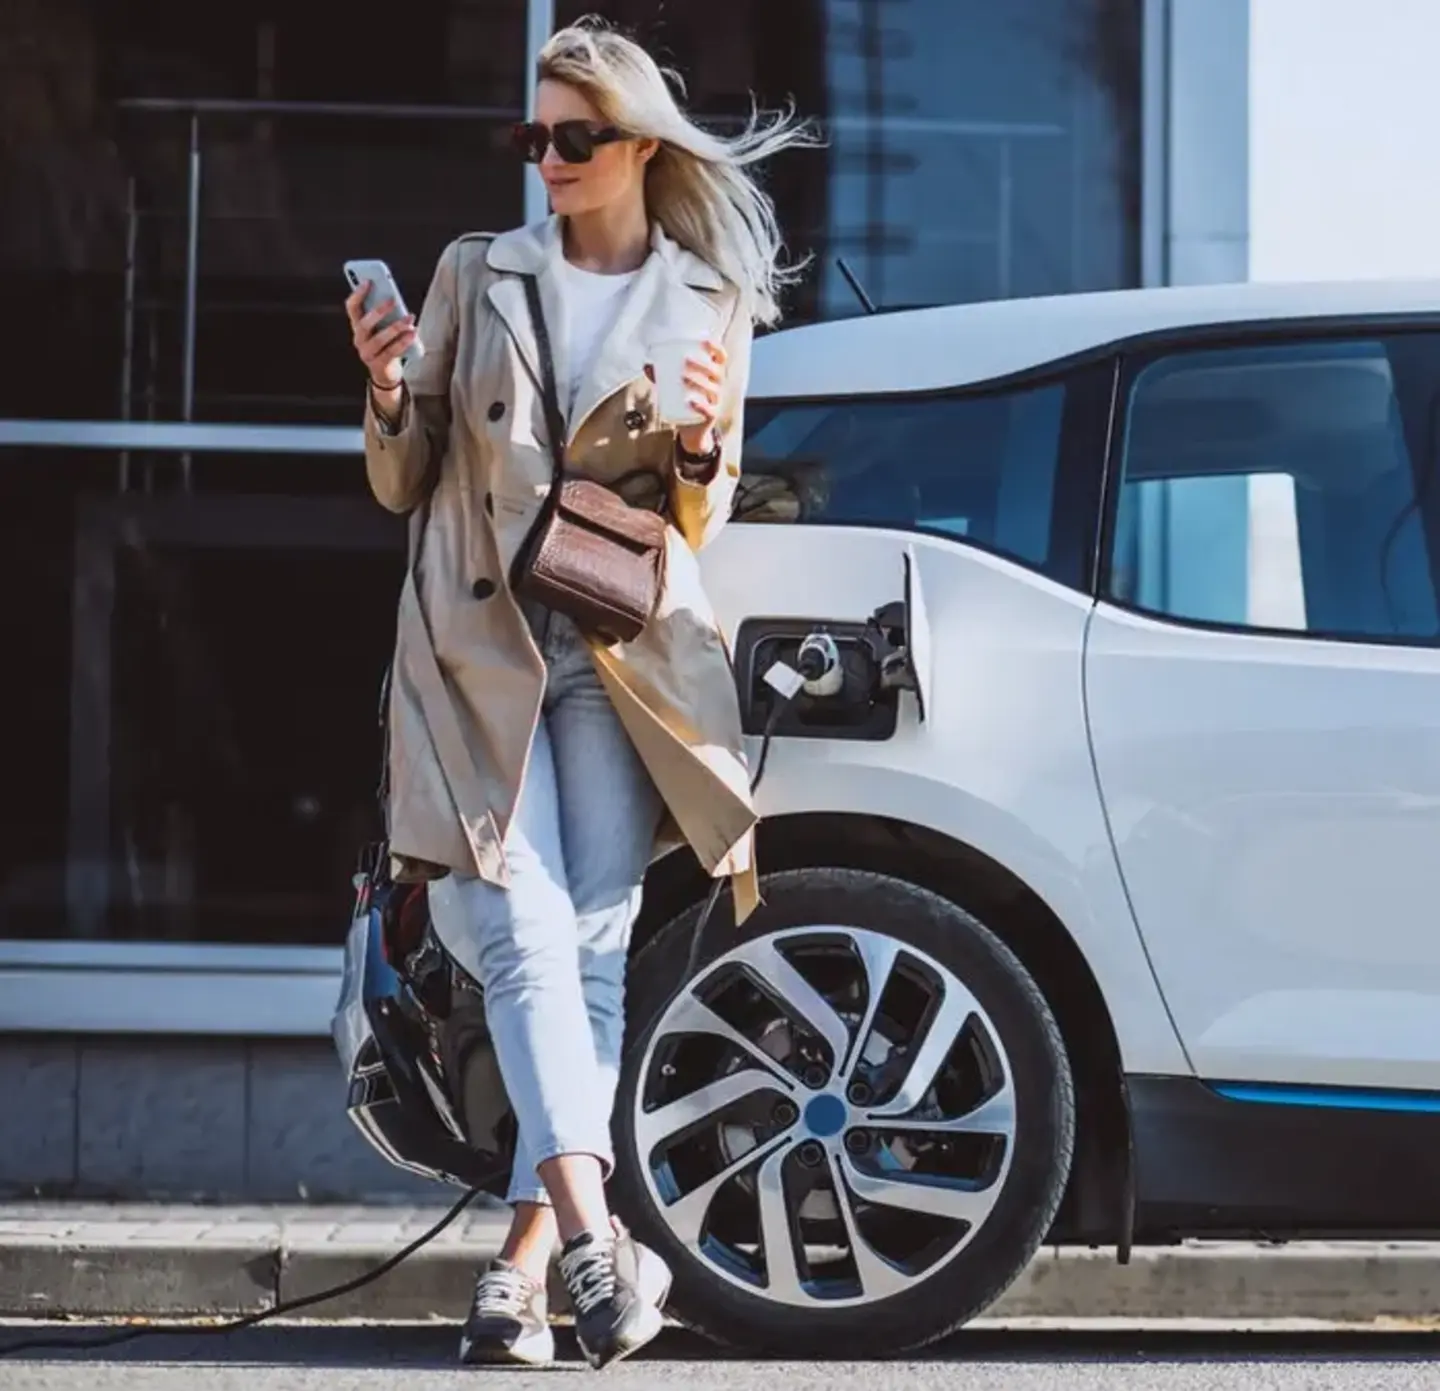 A woman with blonde hair in sunglasses and a tan coat leans against a white electric car that is plugged in and charging.